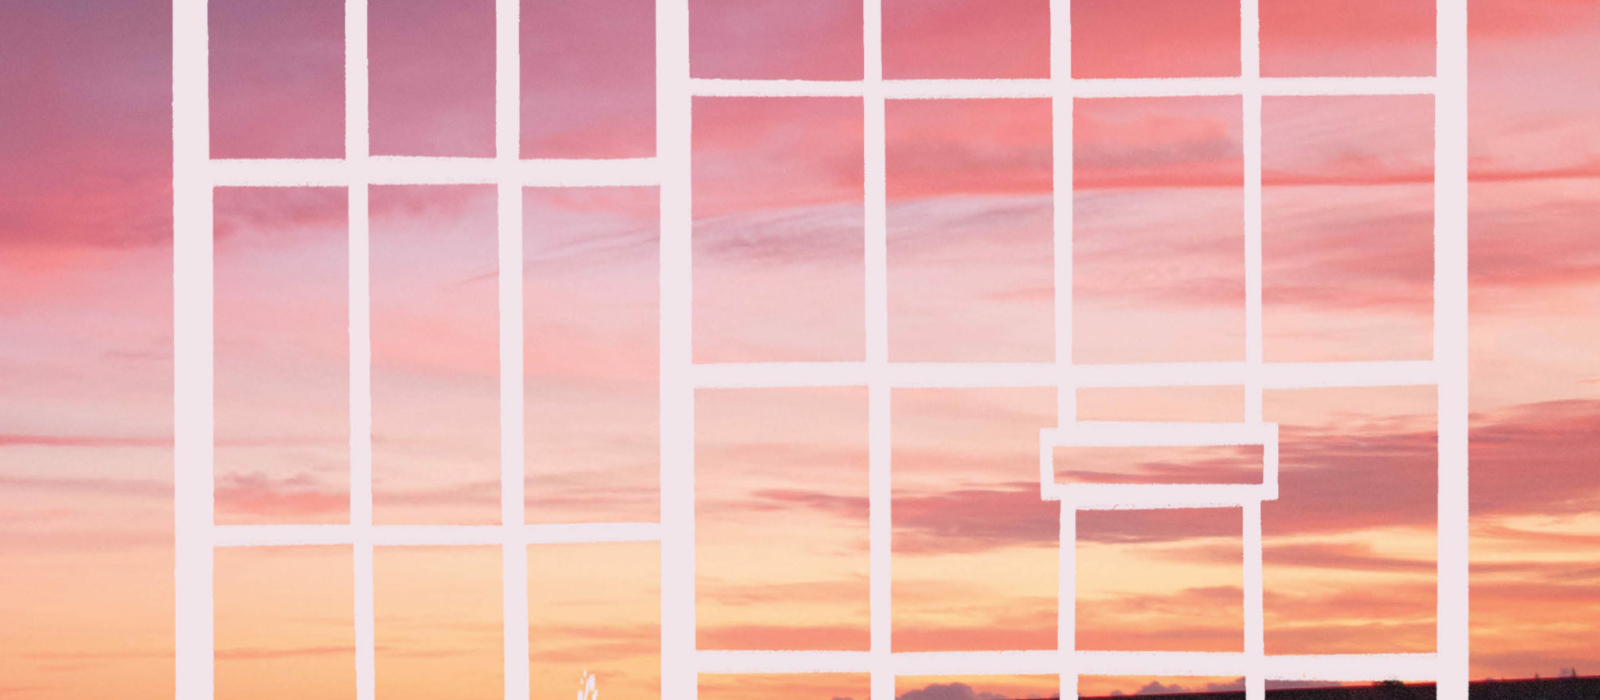 A drawing of jail bars is superimposed over a beautiful sunset.